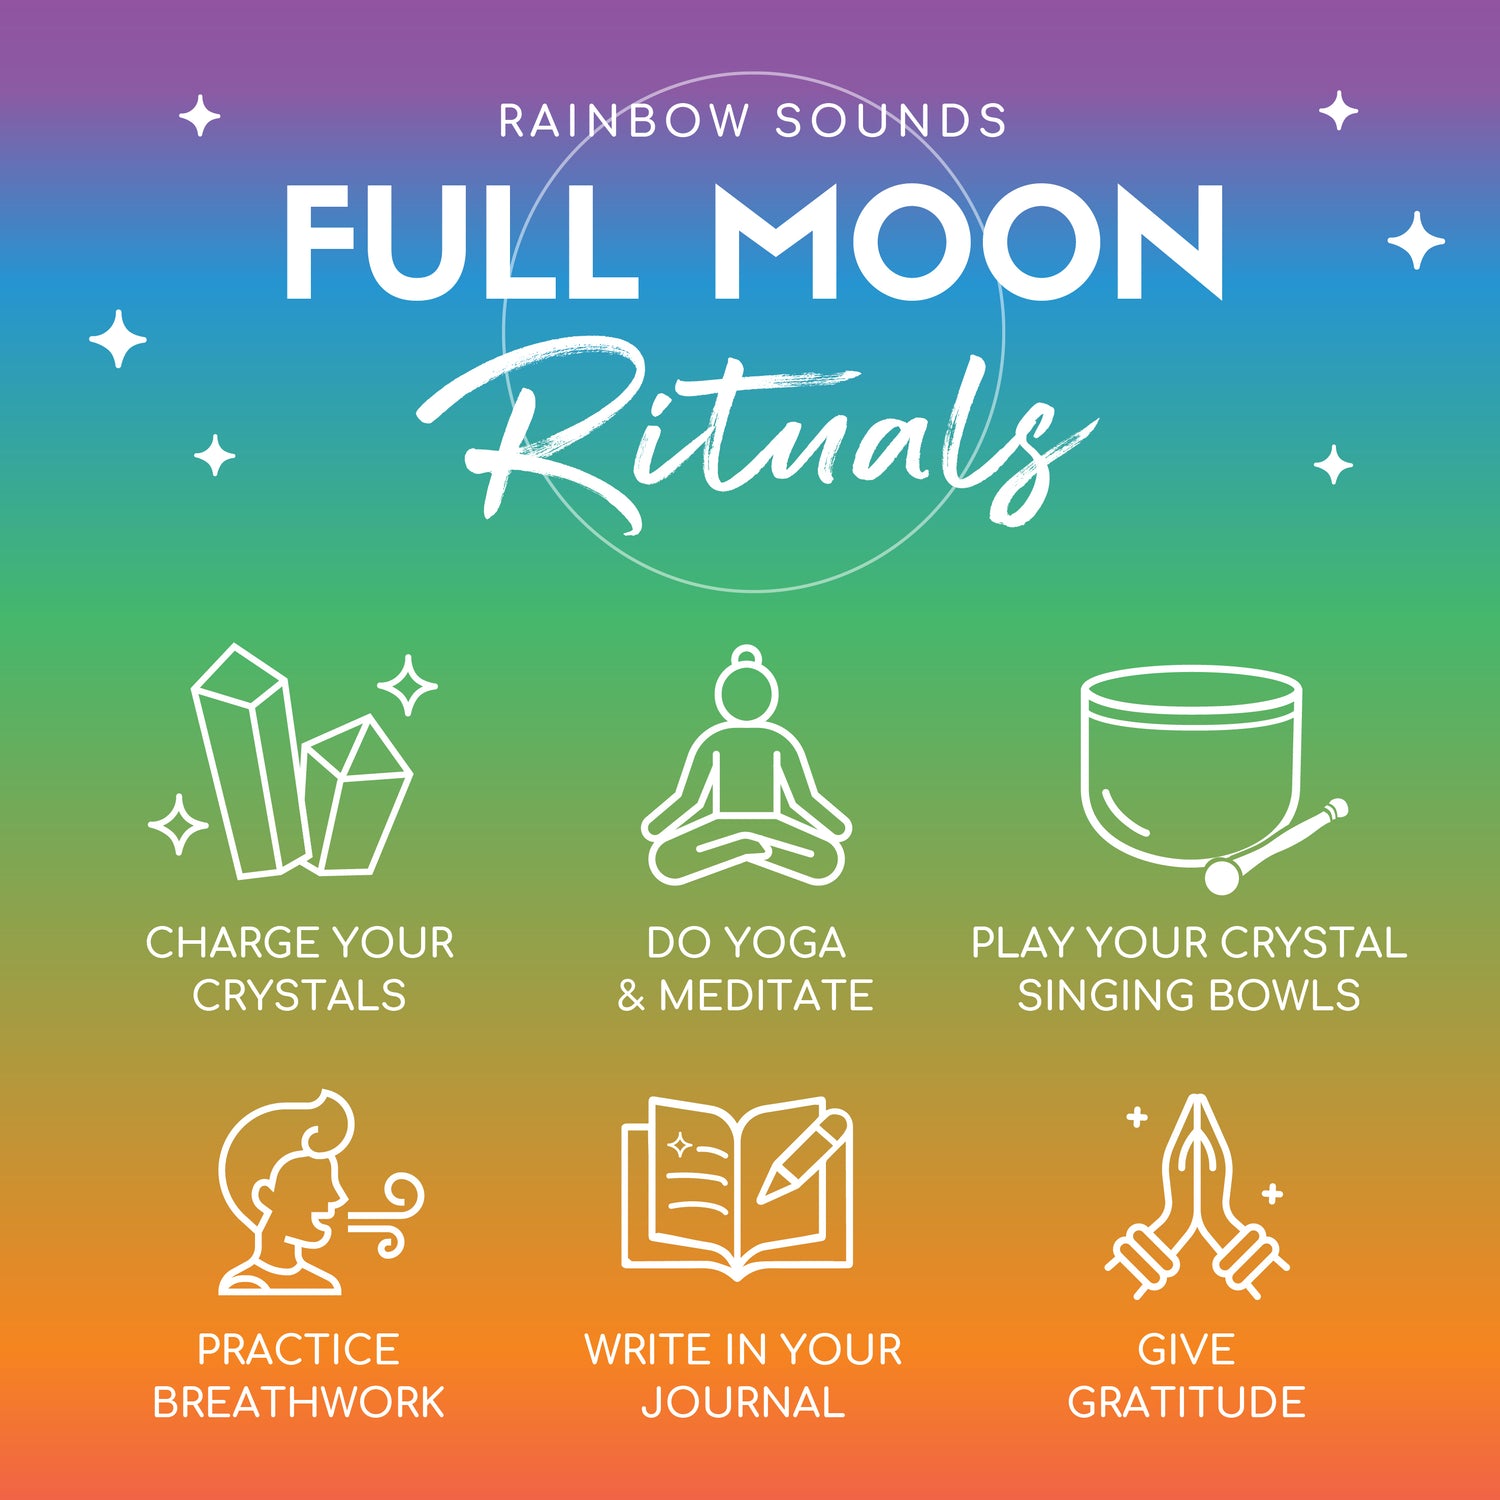 Full Moon Rituals with Crystal Singing Bowls